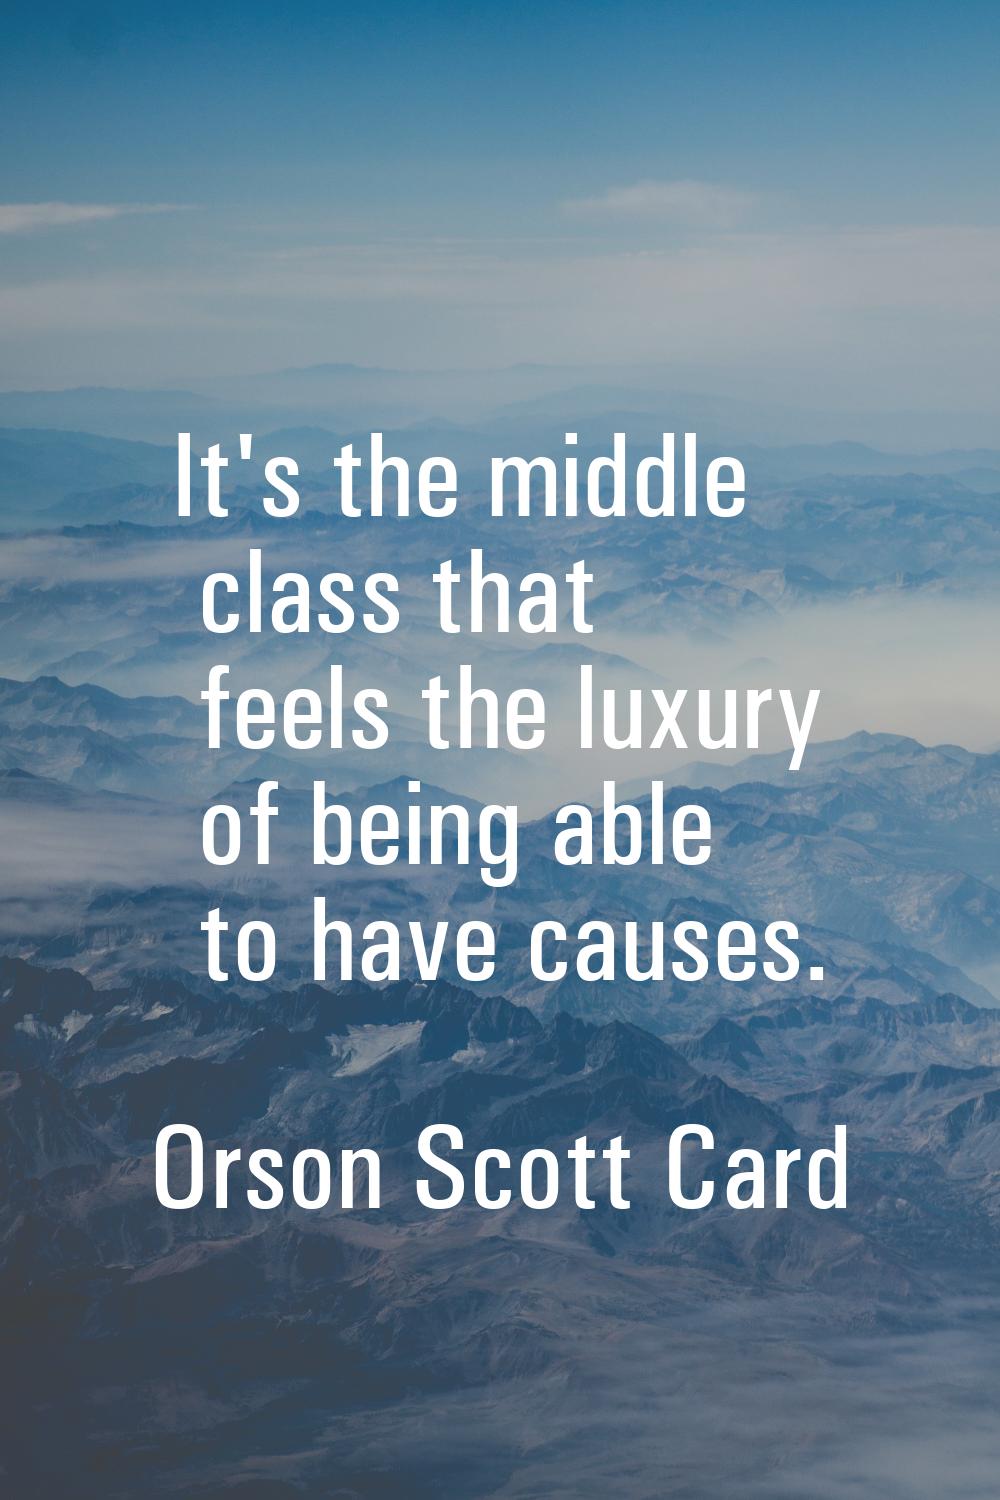 It's the middle class that feels the luxury of being able to have causes.